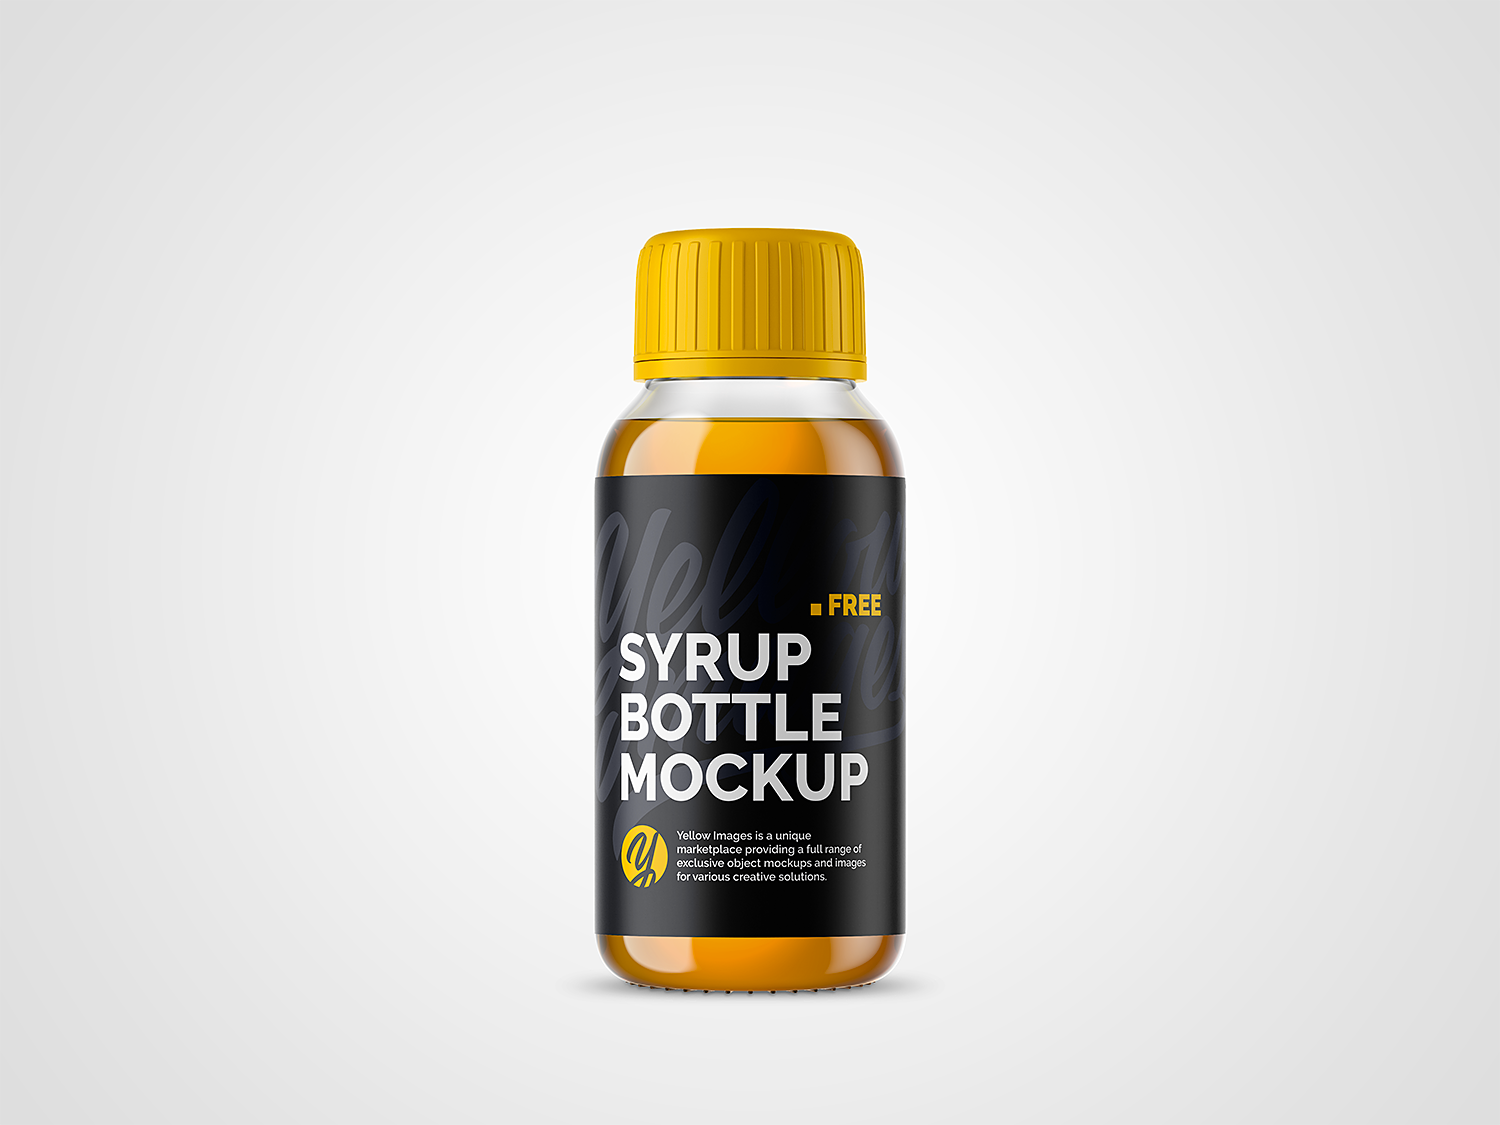 Download Oil Bottle Mockup Free Psd Free Packaging Mockup Free Packaging Mockups To Download Boxes Wine Bottles Digipack And Other Great Packaging Mockups Available To Free Download